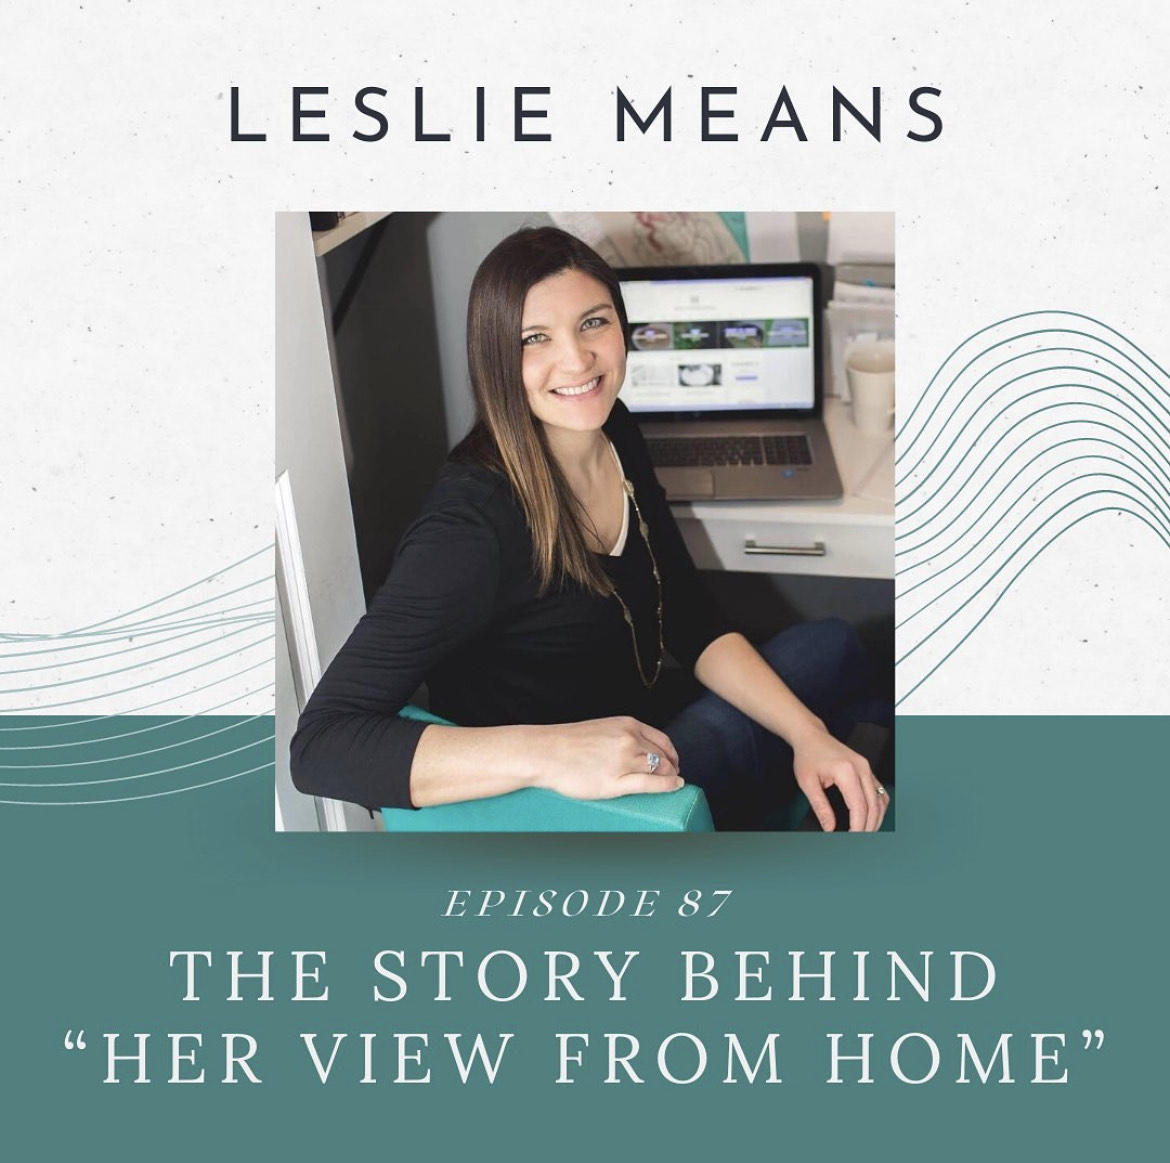 Episode 87: The Story Behind “Her View From Home” with Leslie Means